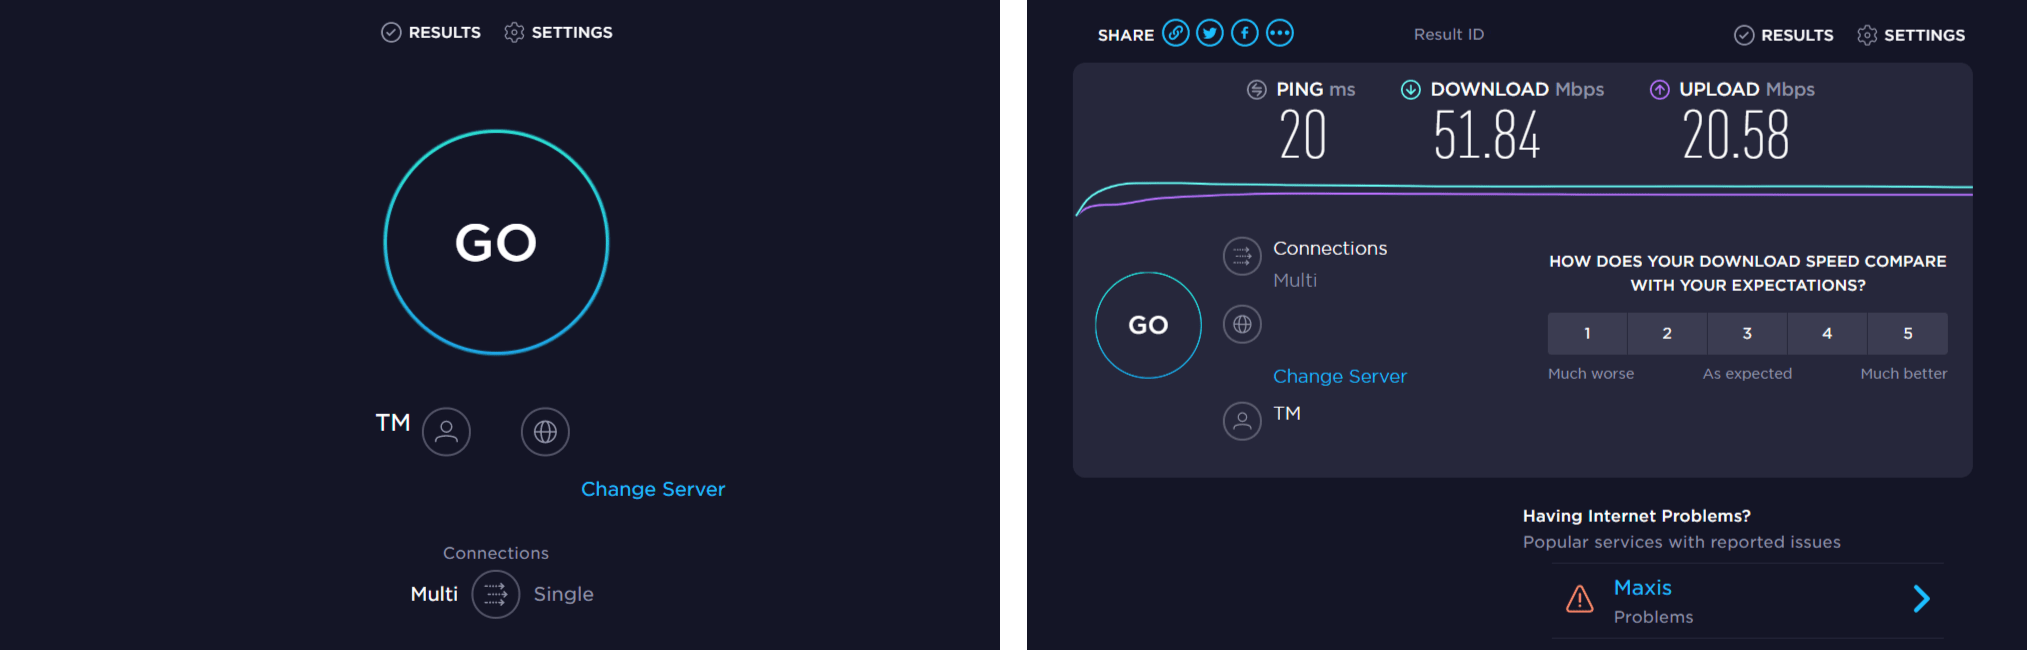 Check internet speed with Speedtest if Discord "Upload Failed" error or images not uploading